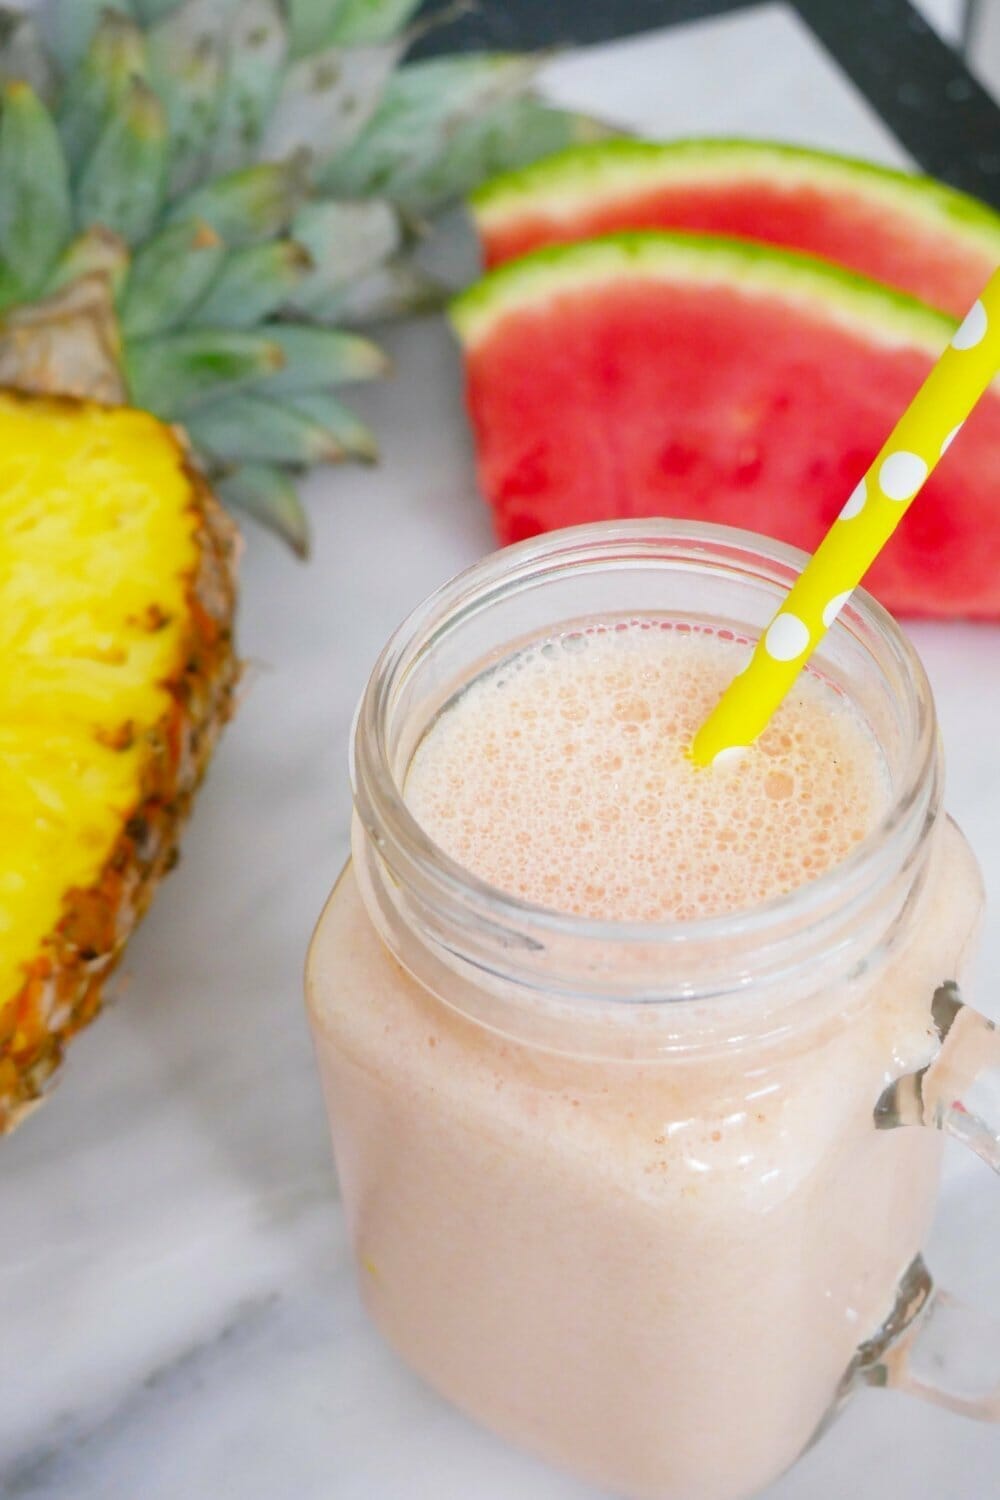 Super healthy watermelon pineapple smoothie for weight loss (+ tips!) via @thesmoothiesite